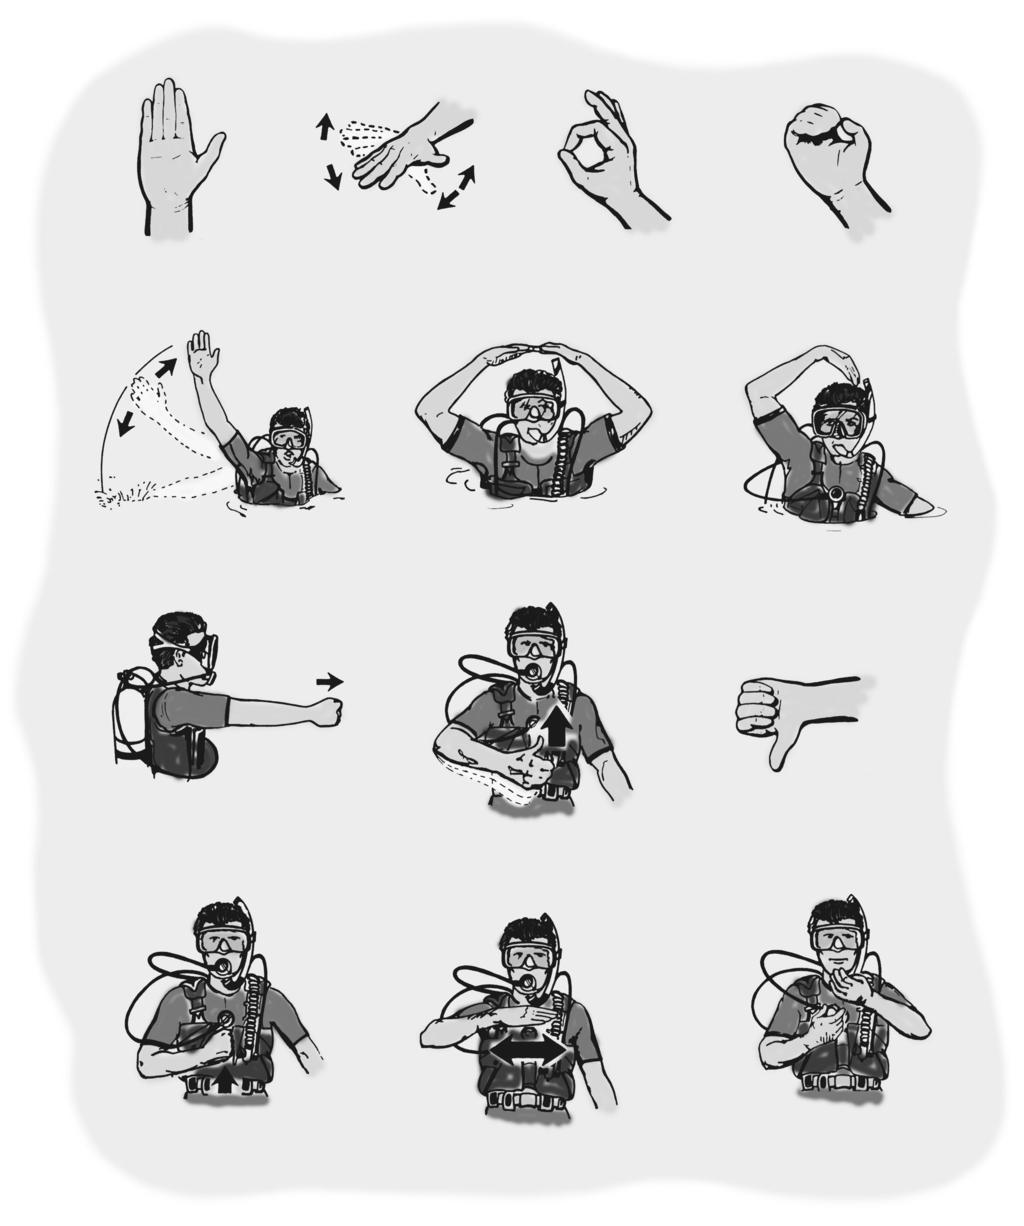 COMMUNICATION These are standard scuba hand signals that are useful both above and below the surface. You will learn these as part of your Scuba BSA experience. Stop; hold it; stay there.